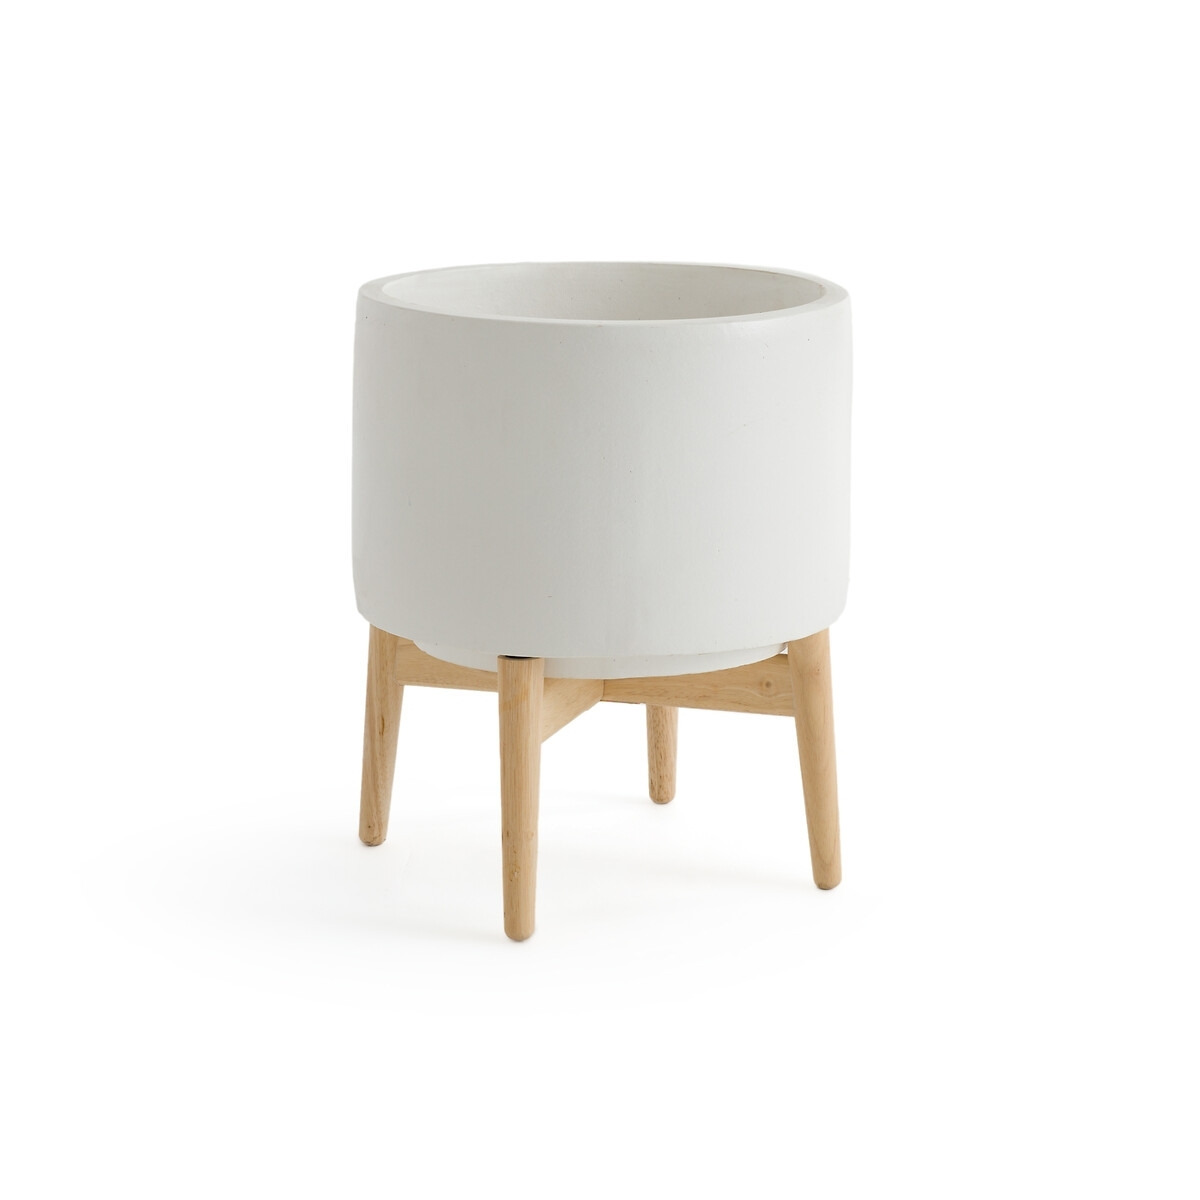 Florian Ceramic Planter with Wooden Stand - image 1